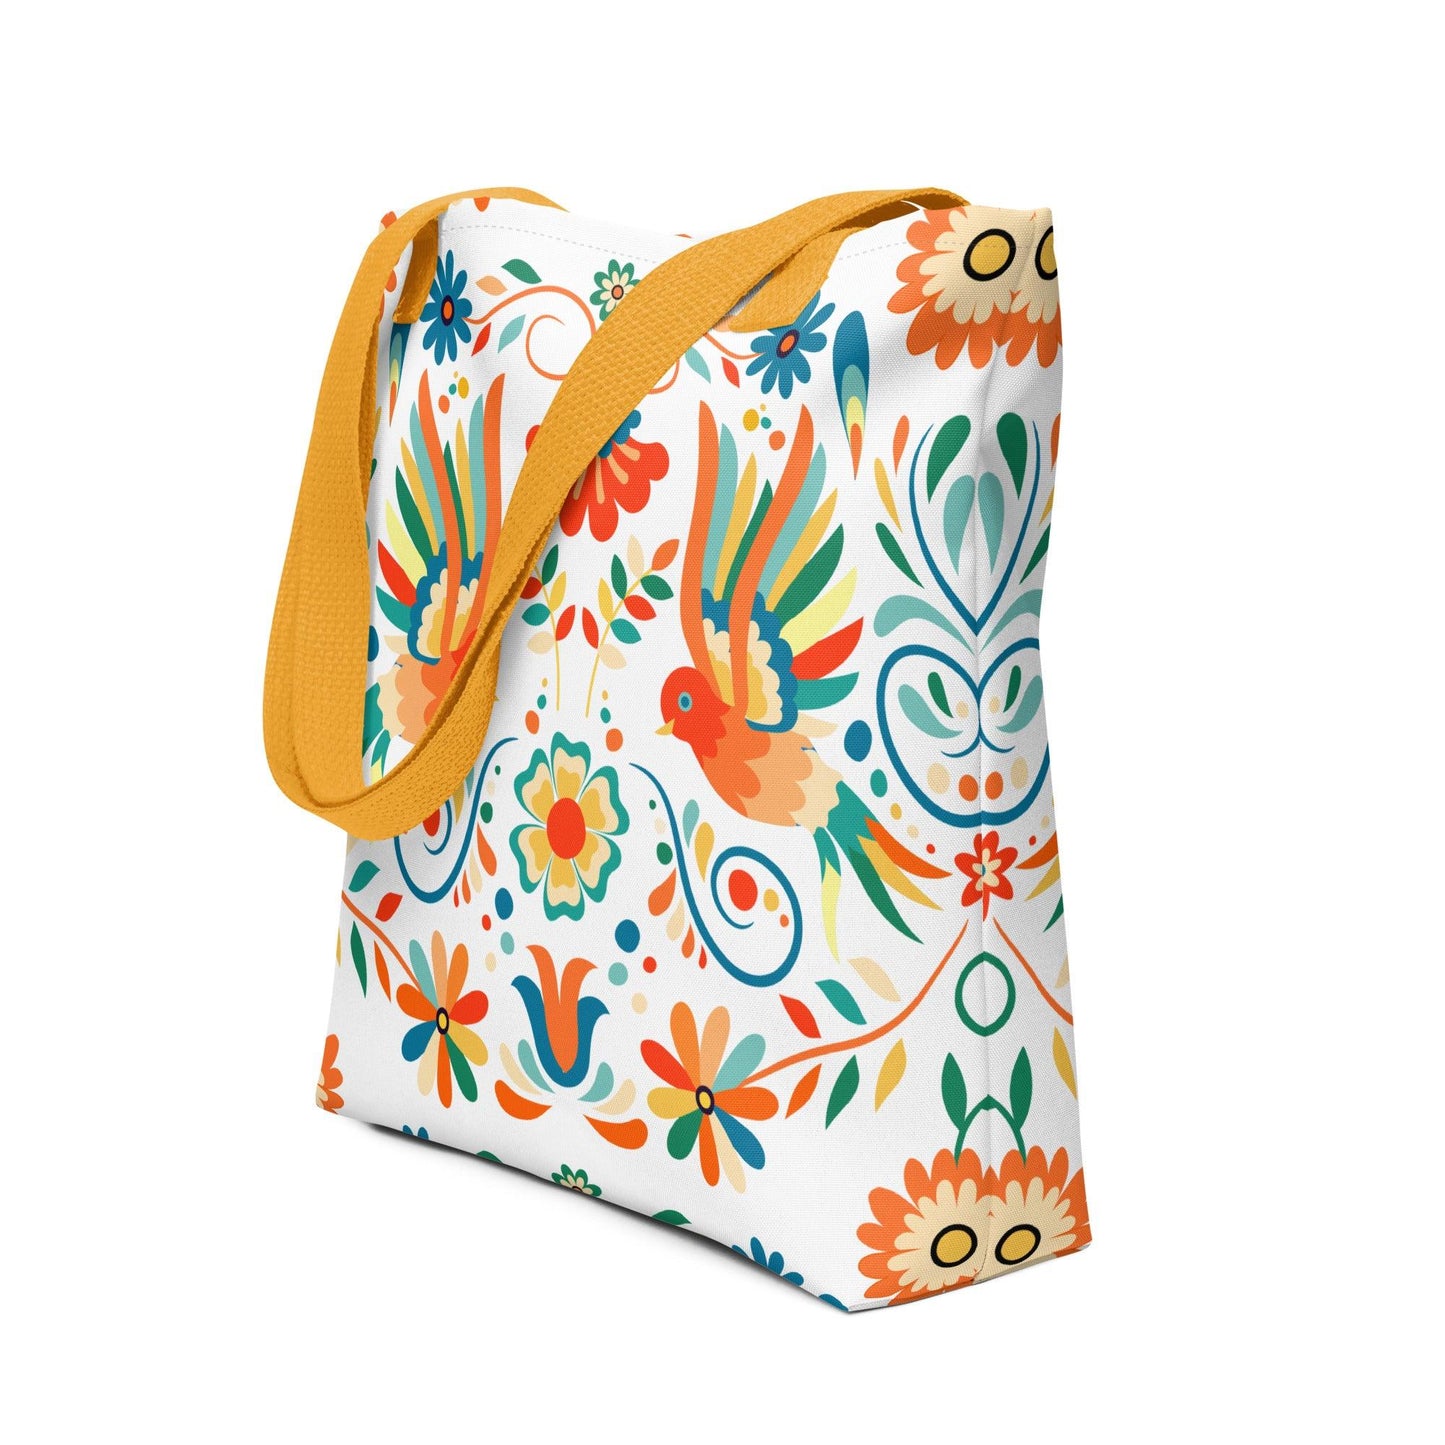 Mexican Otomi Print Tote Bag - The Global Wanderer